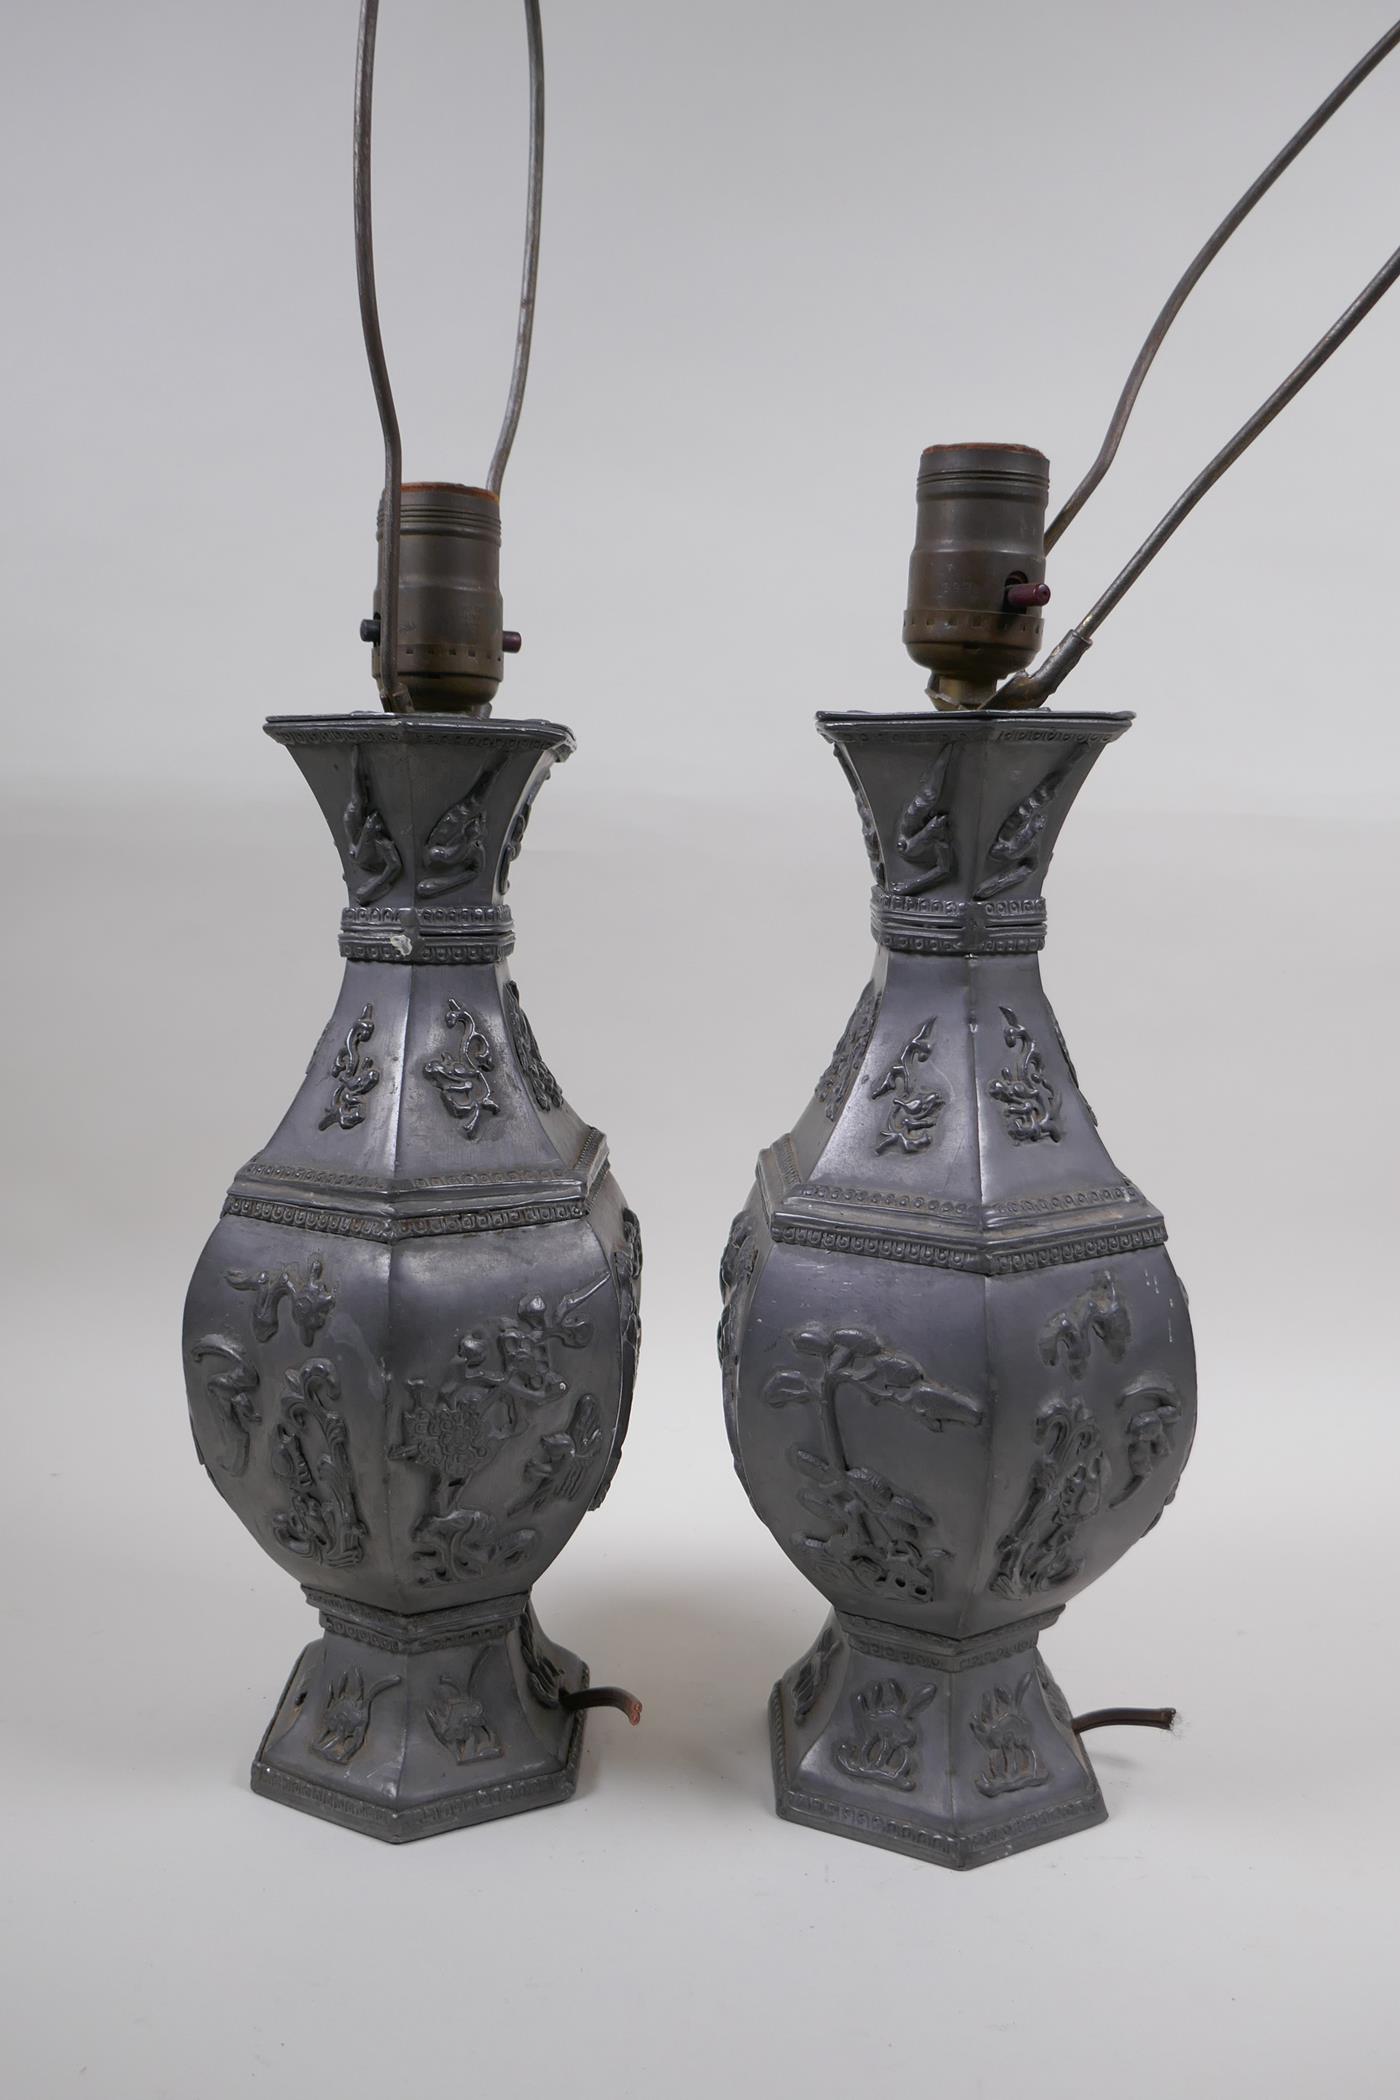 A pair of Chinese pewter lamps decorated with mythical creatures and auspicious symbols, 35cm high - Image 2 of 4